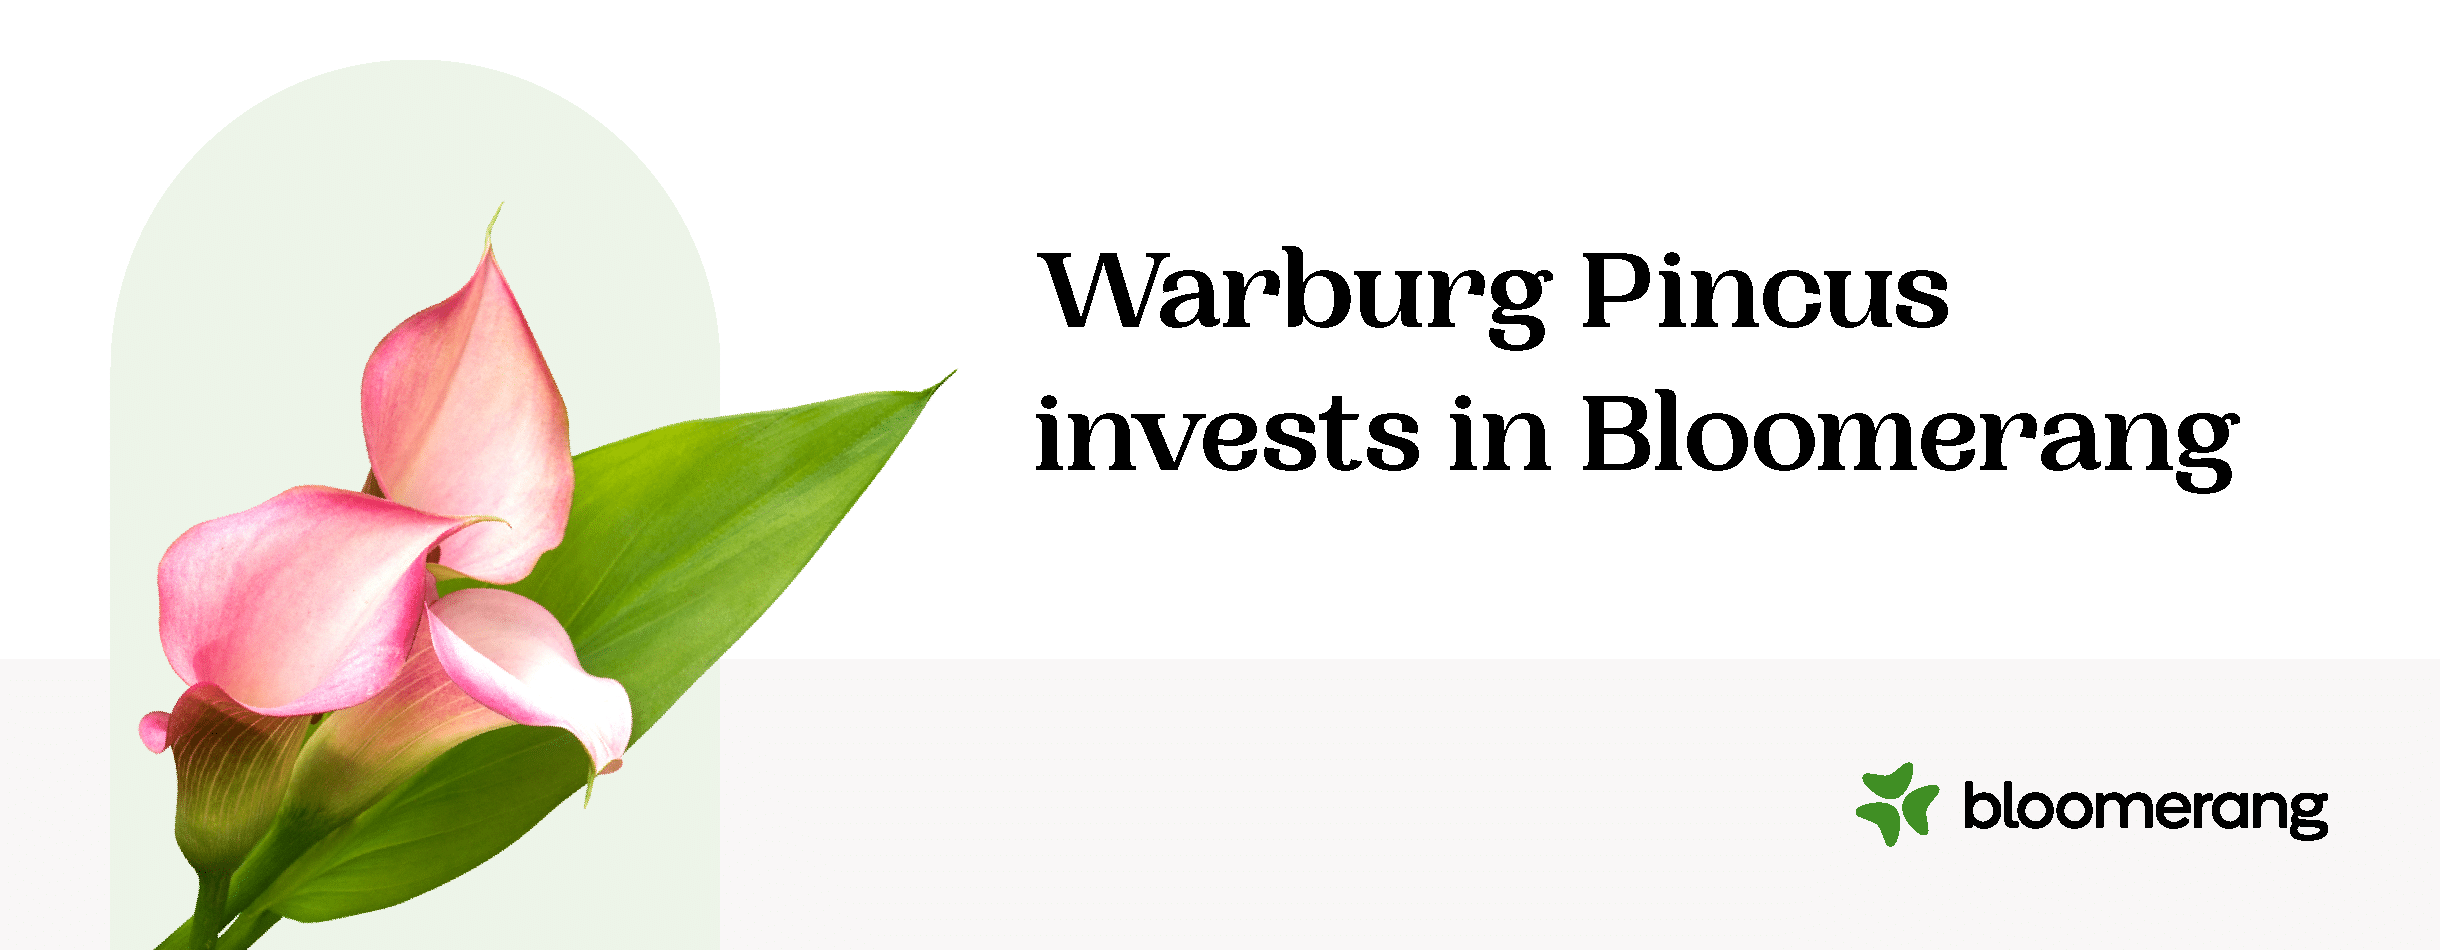 Bloomerang secures strategic investment from Warburg Pincus